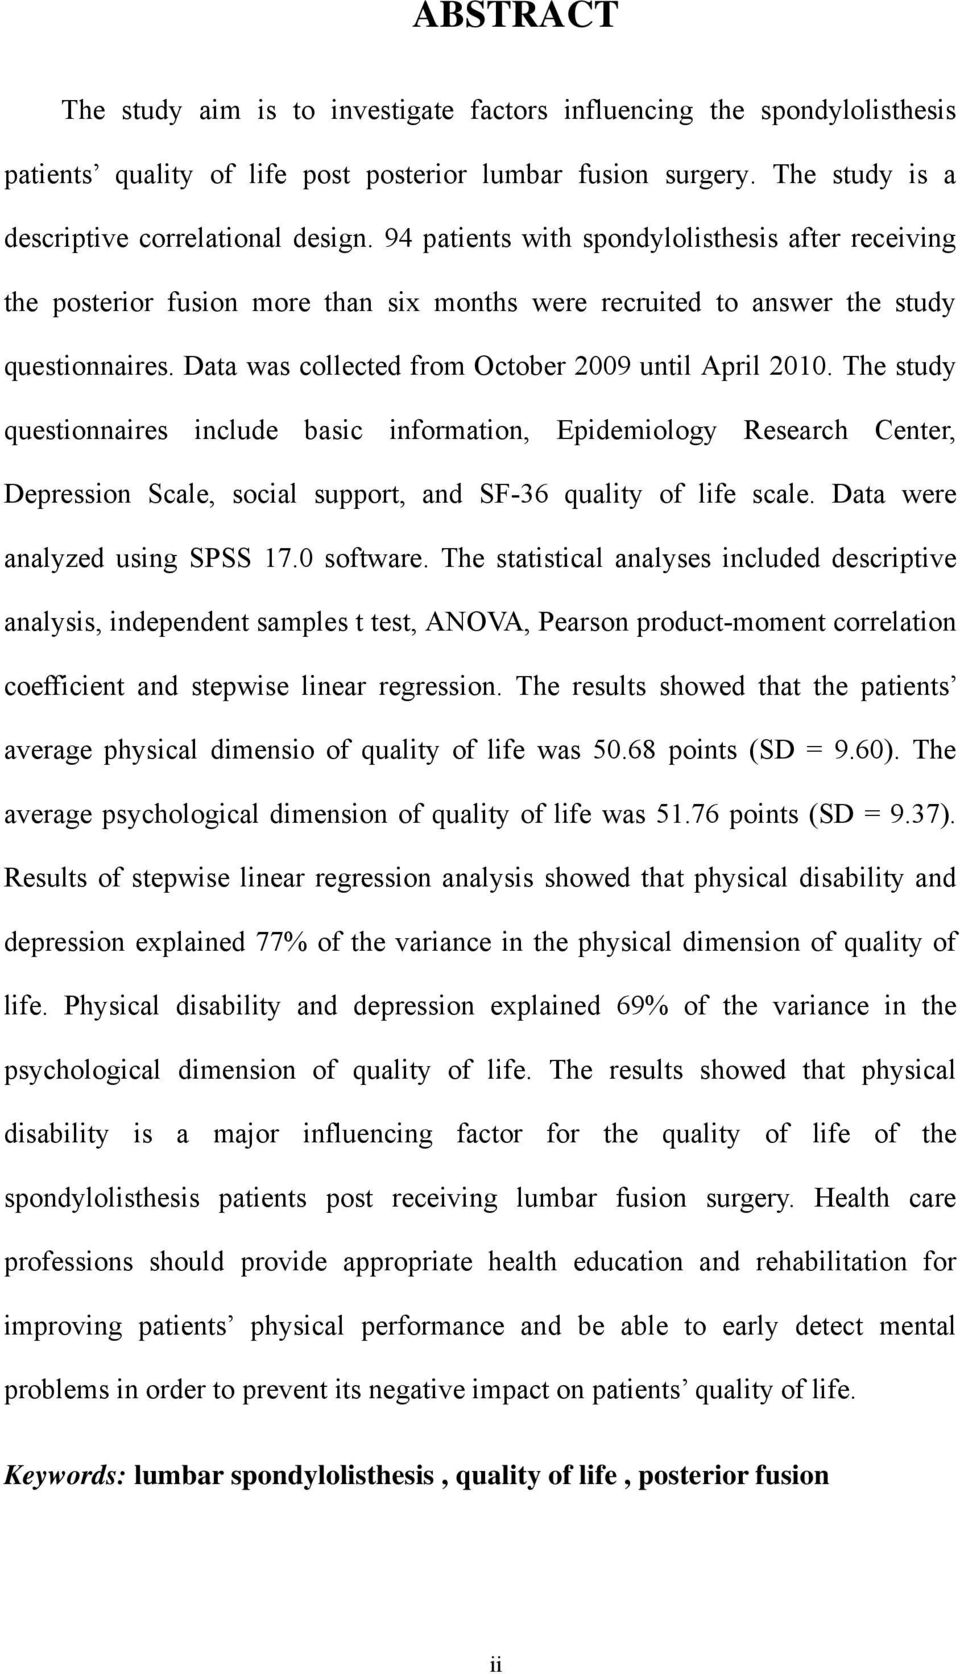 The study questionnaires include basic information, Epidemiology Research Center, Depression Scale, social support, and SF-36 quality of life scale. Data were analyzed using SPSS 17.0 software.